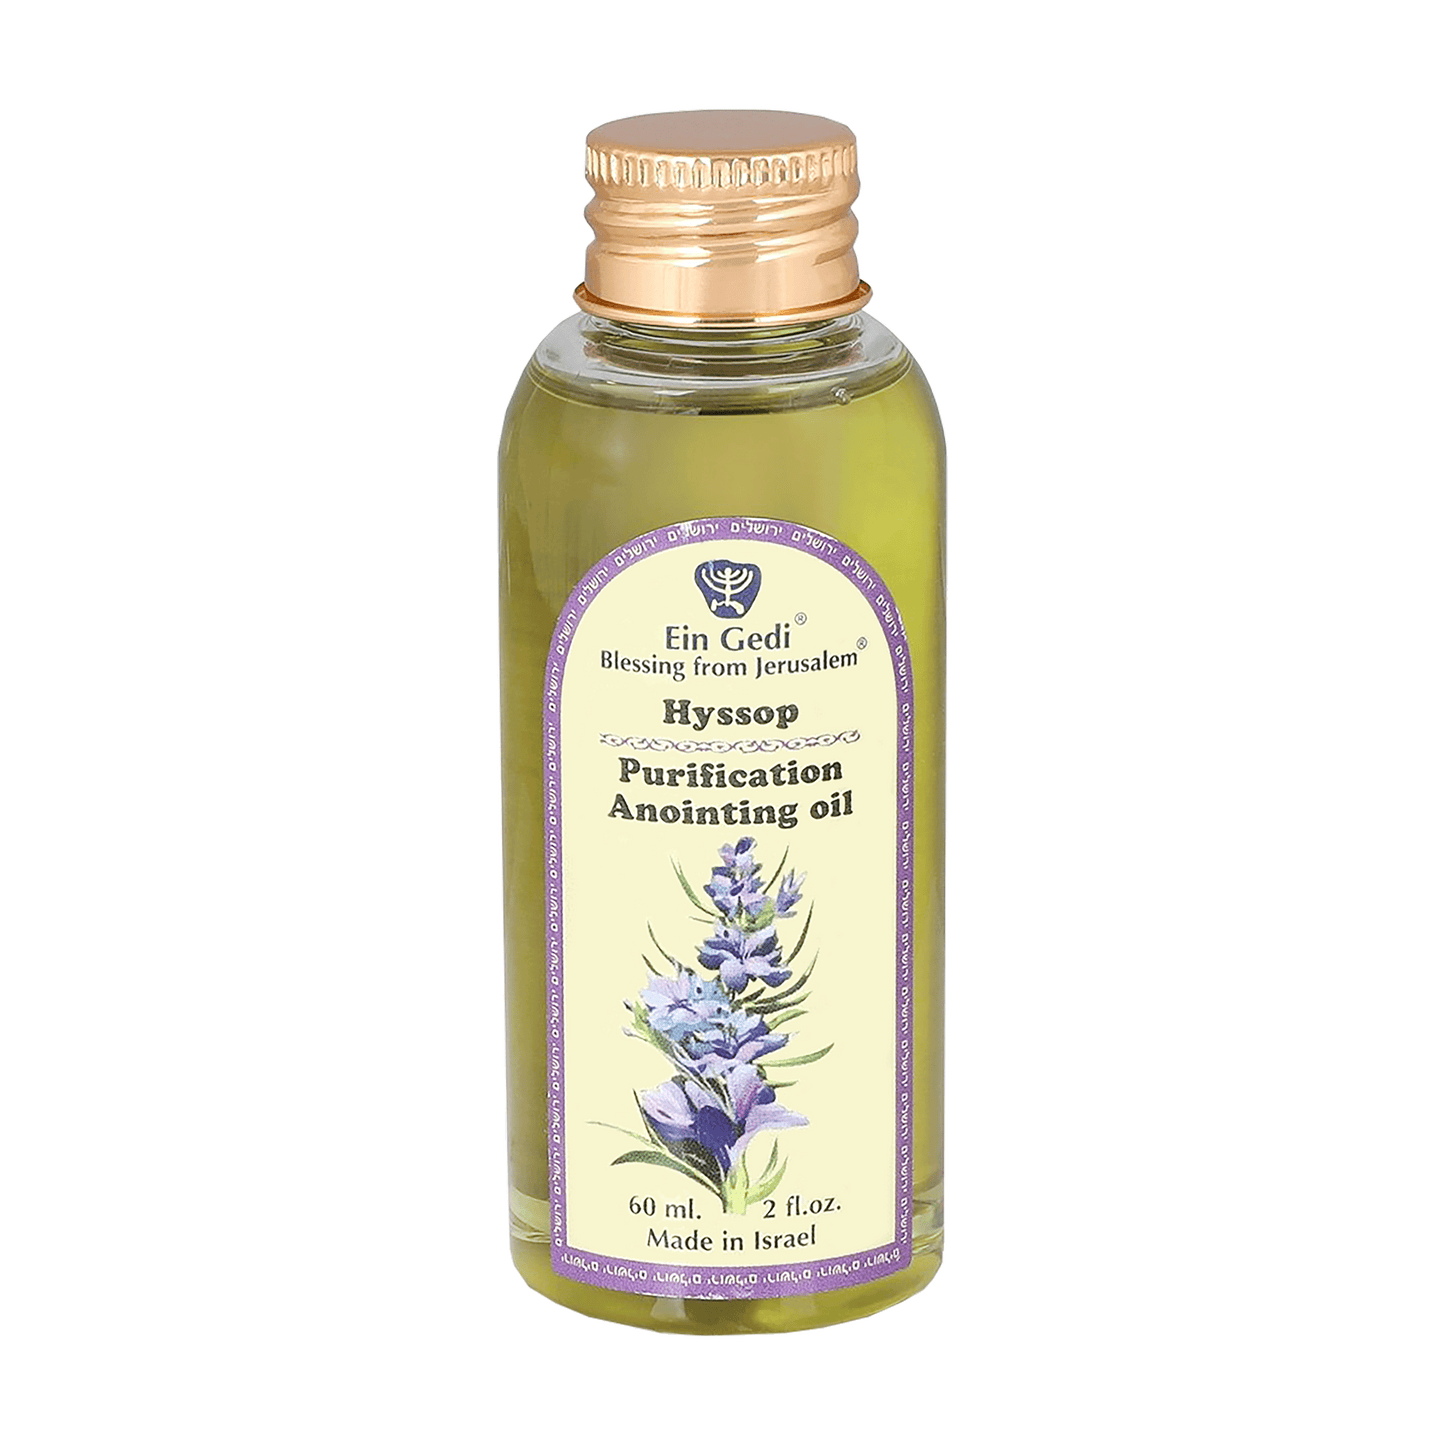 Hyssop Purification Anointing Oil